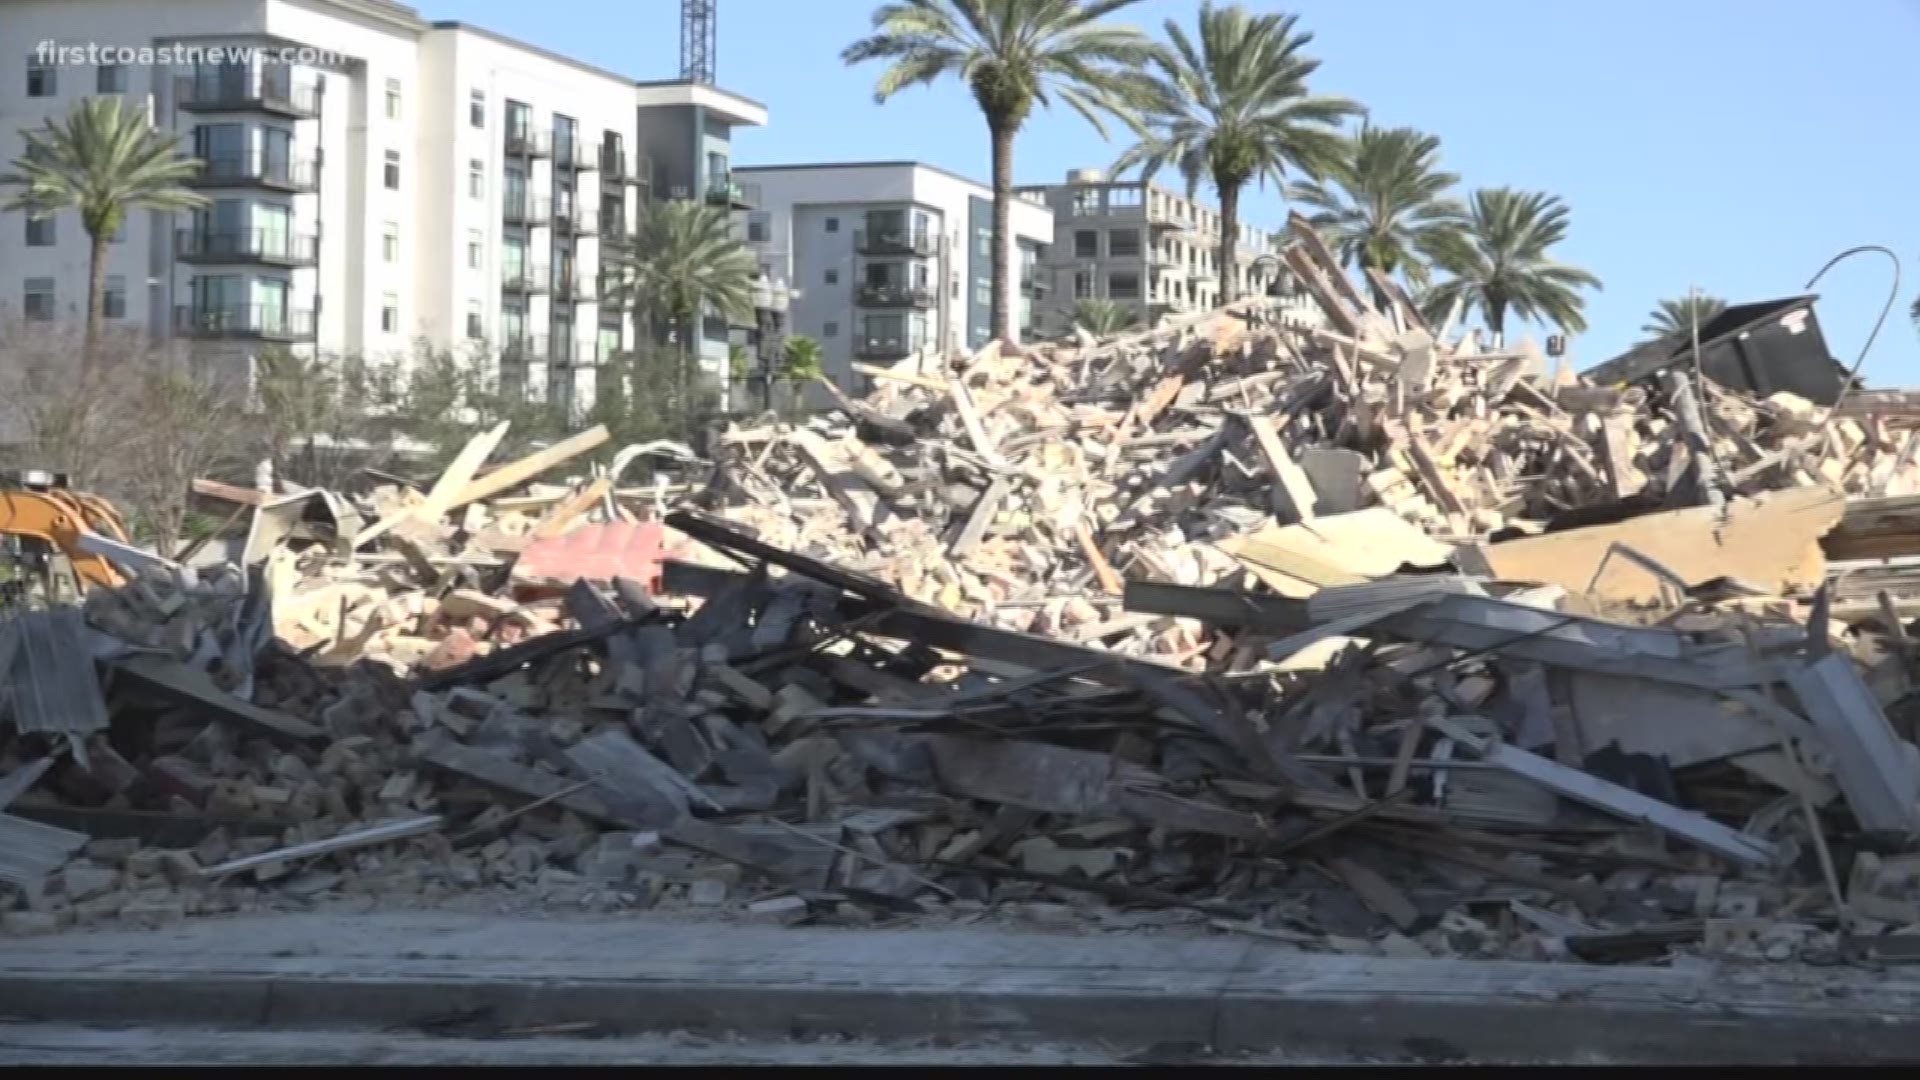 Rubble littered the site of Firehouse 5 in the Brooklyn neighborhood in Jacksonville, as crews worked to demolish the 110-year-old building Saturday.